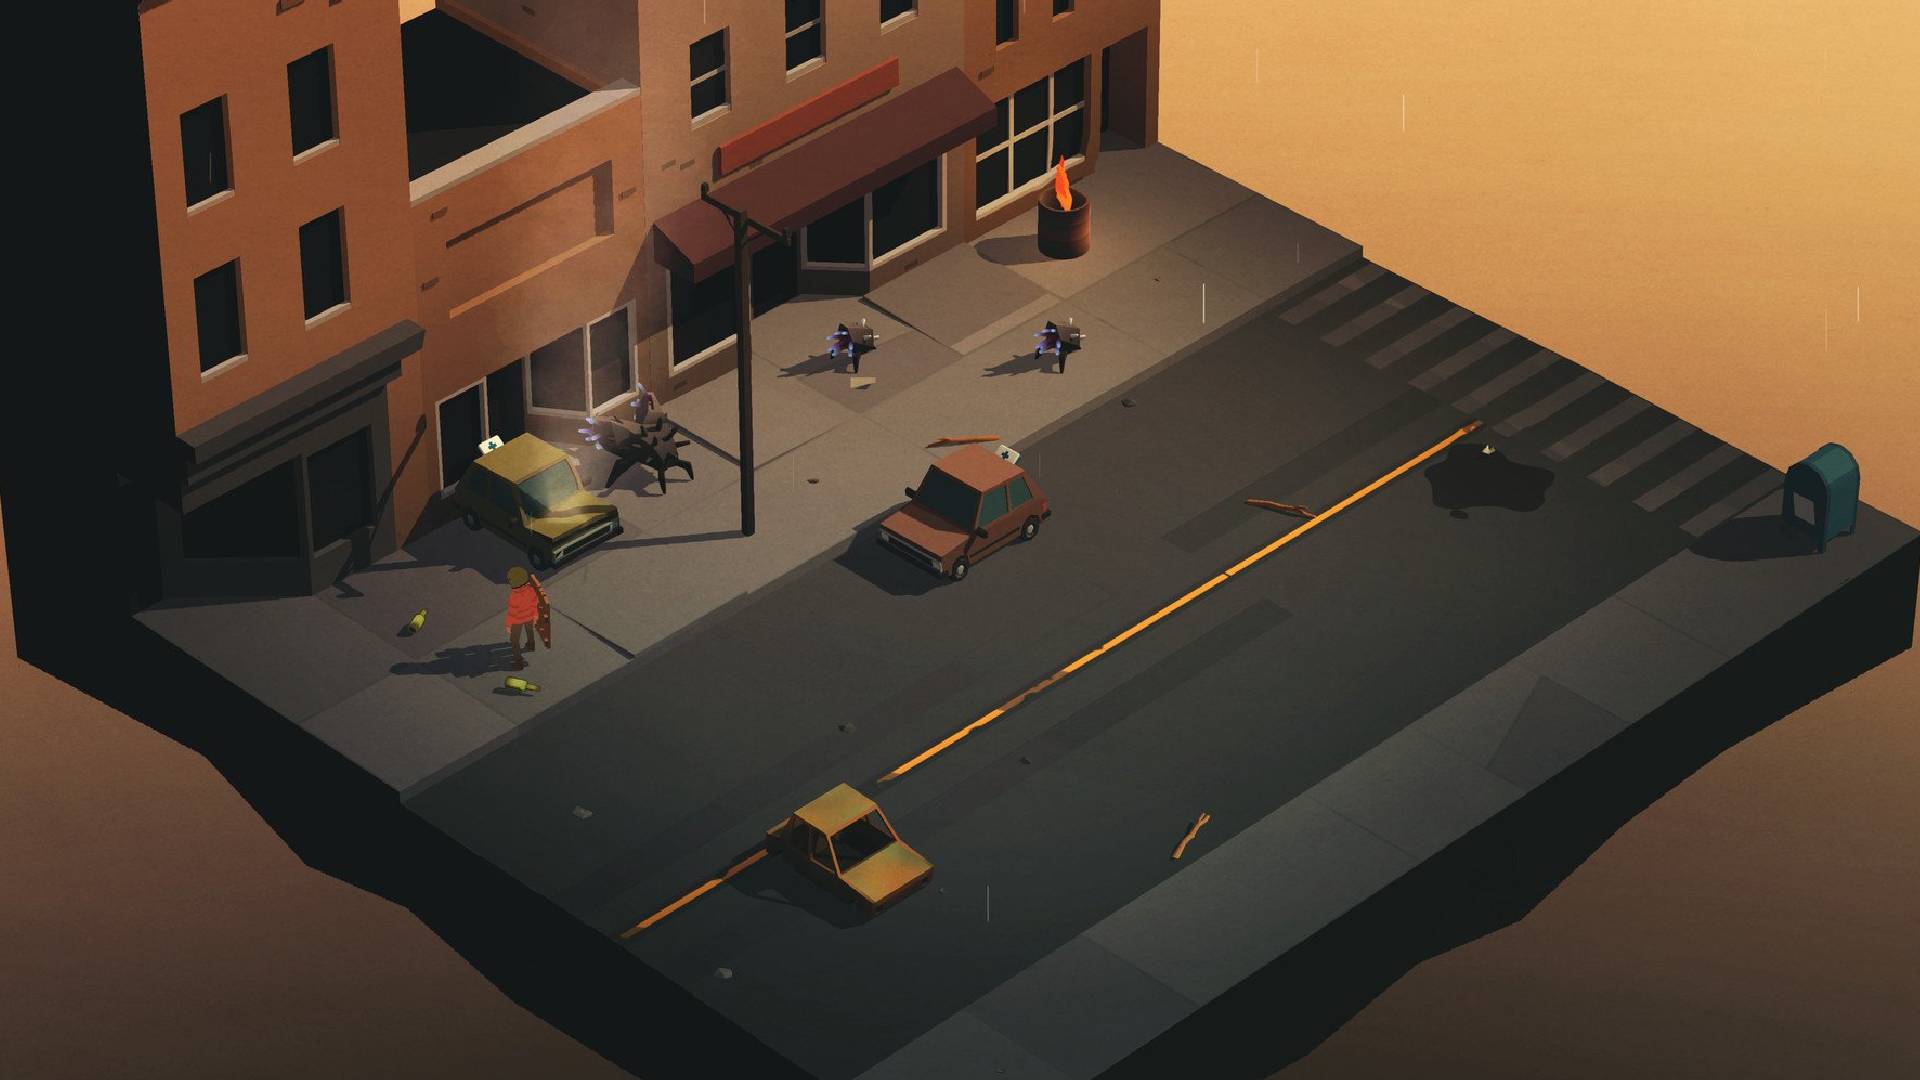 Best post apocalyptic games: an isometric view shows a street and a building, both looking run down and deserted